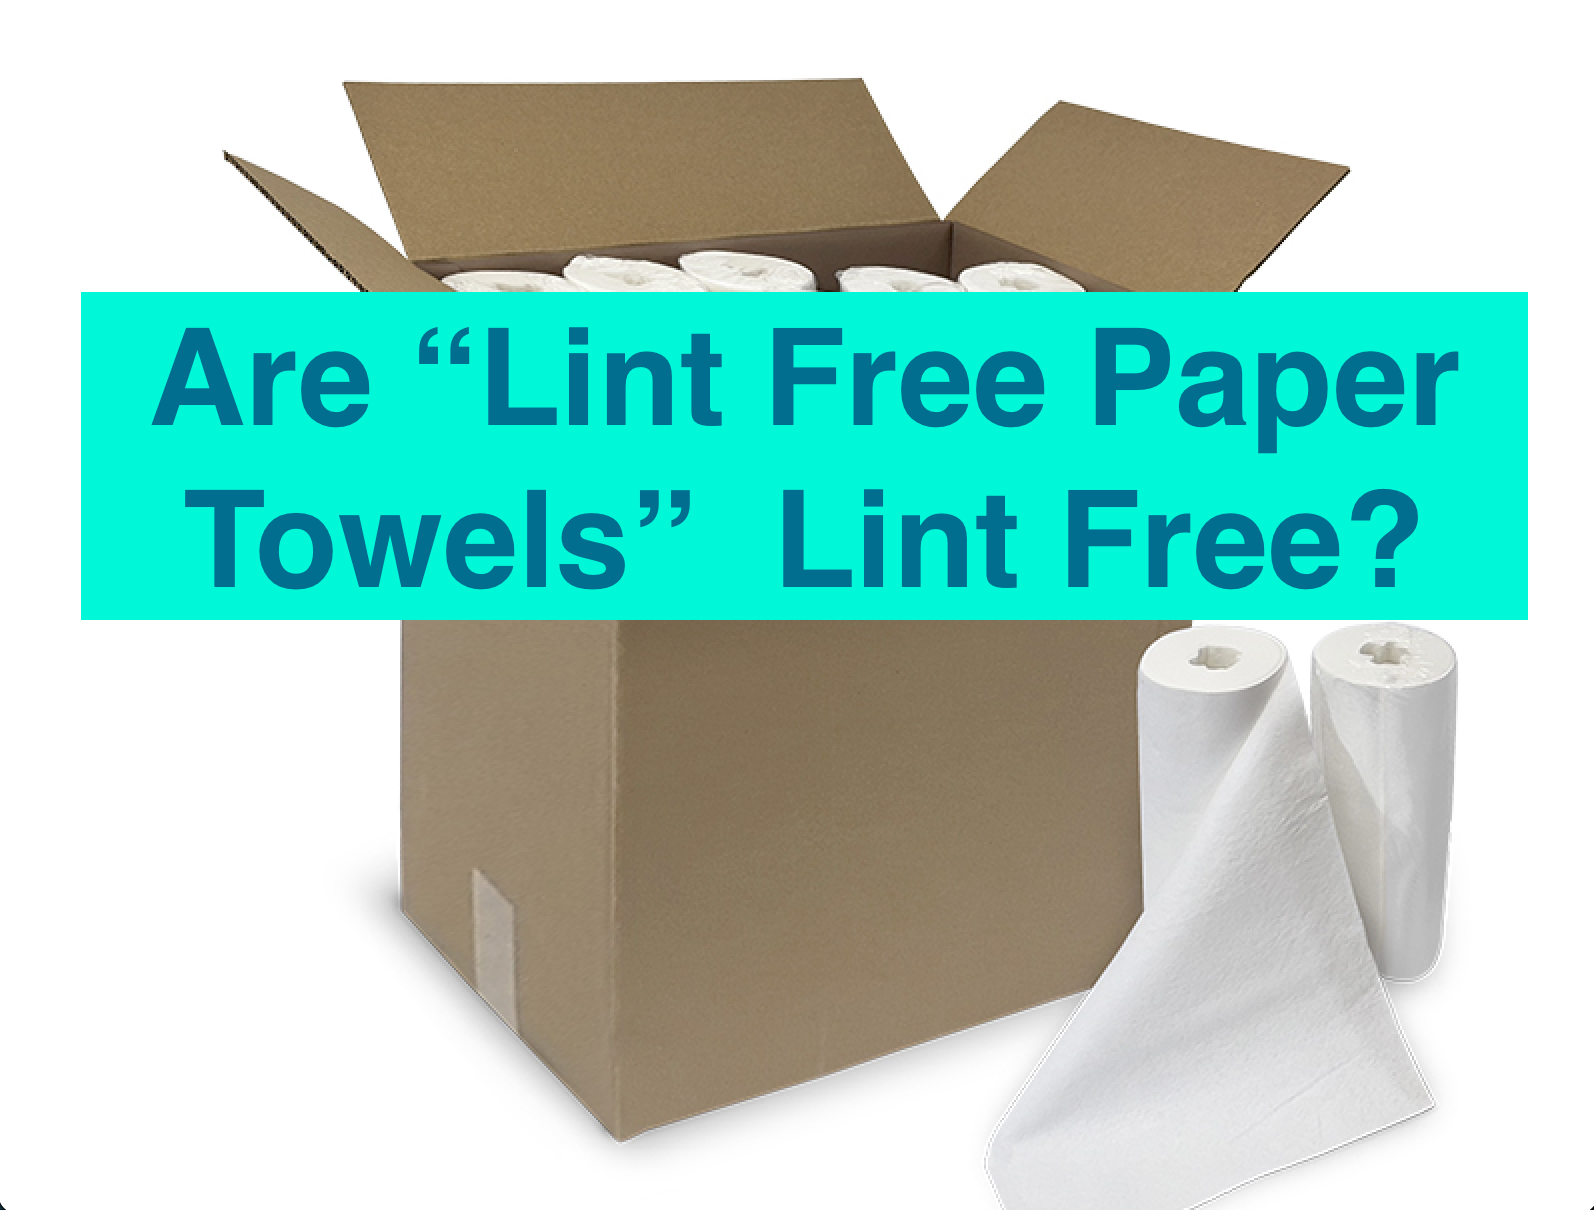 Lint Free Paper Towels - Do They Exist?